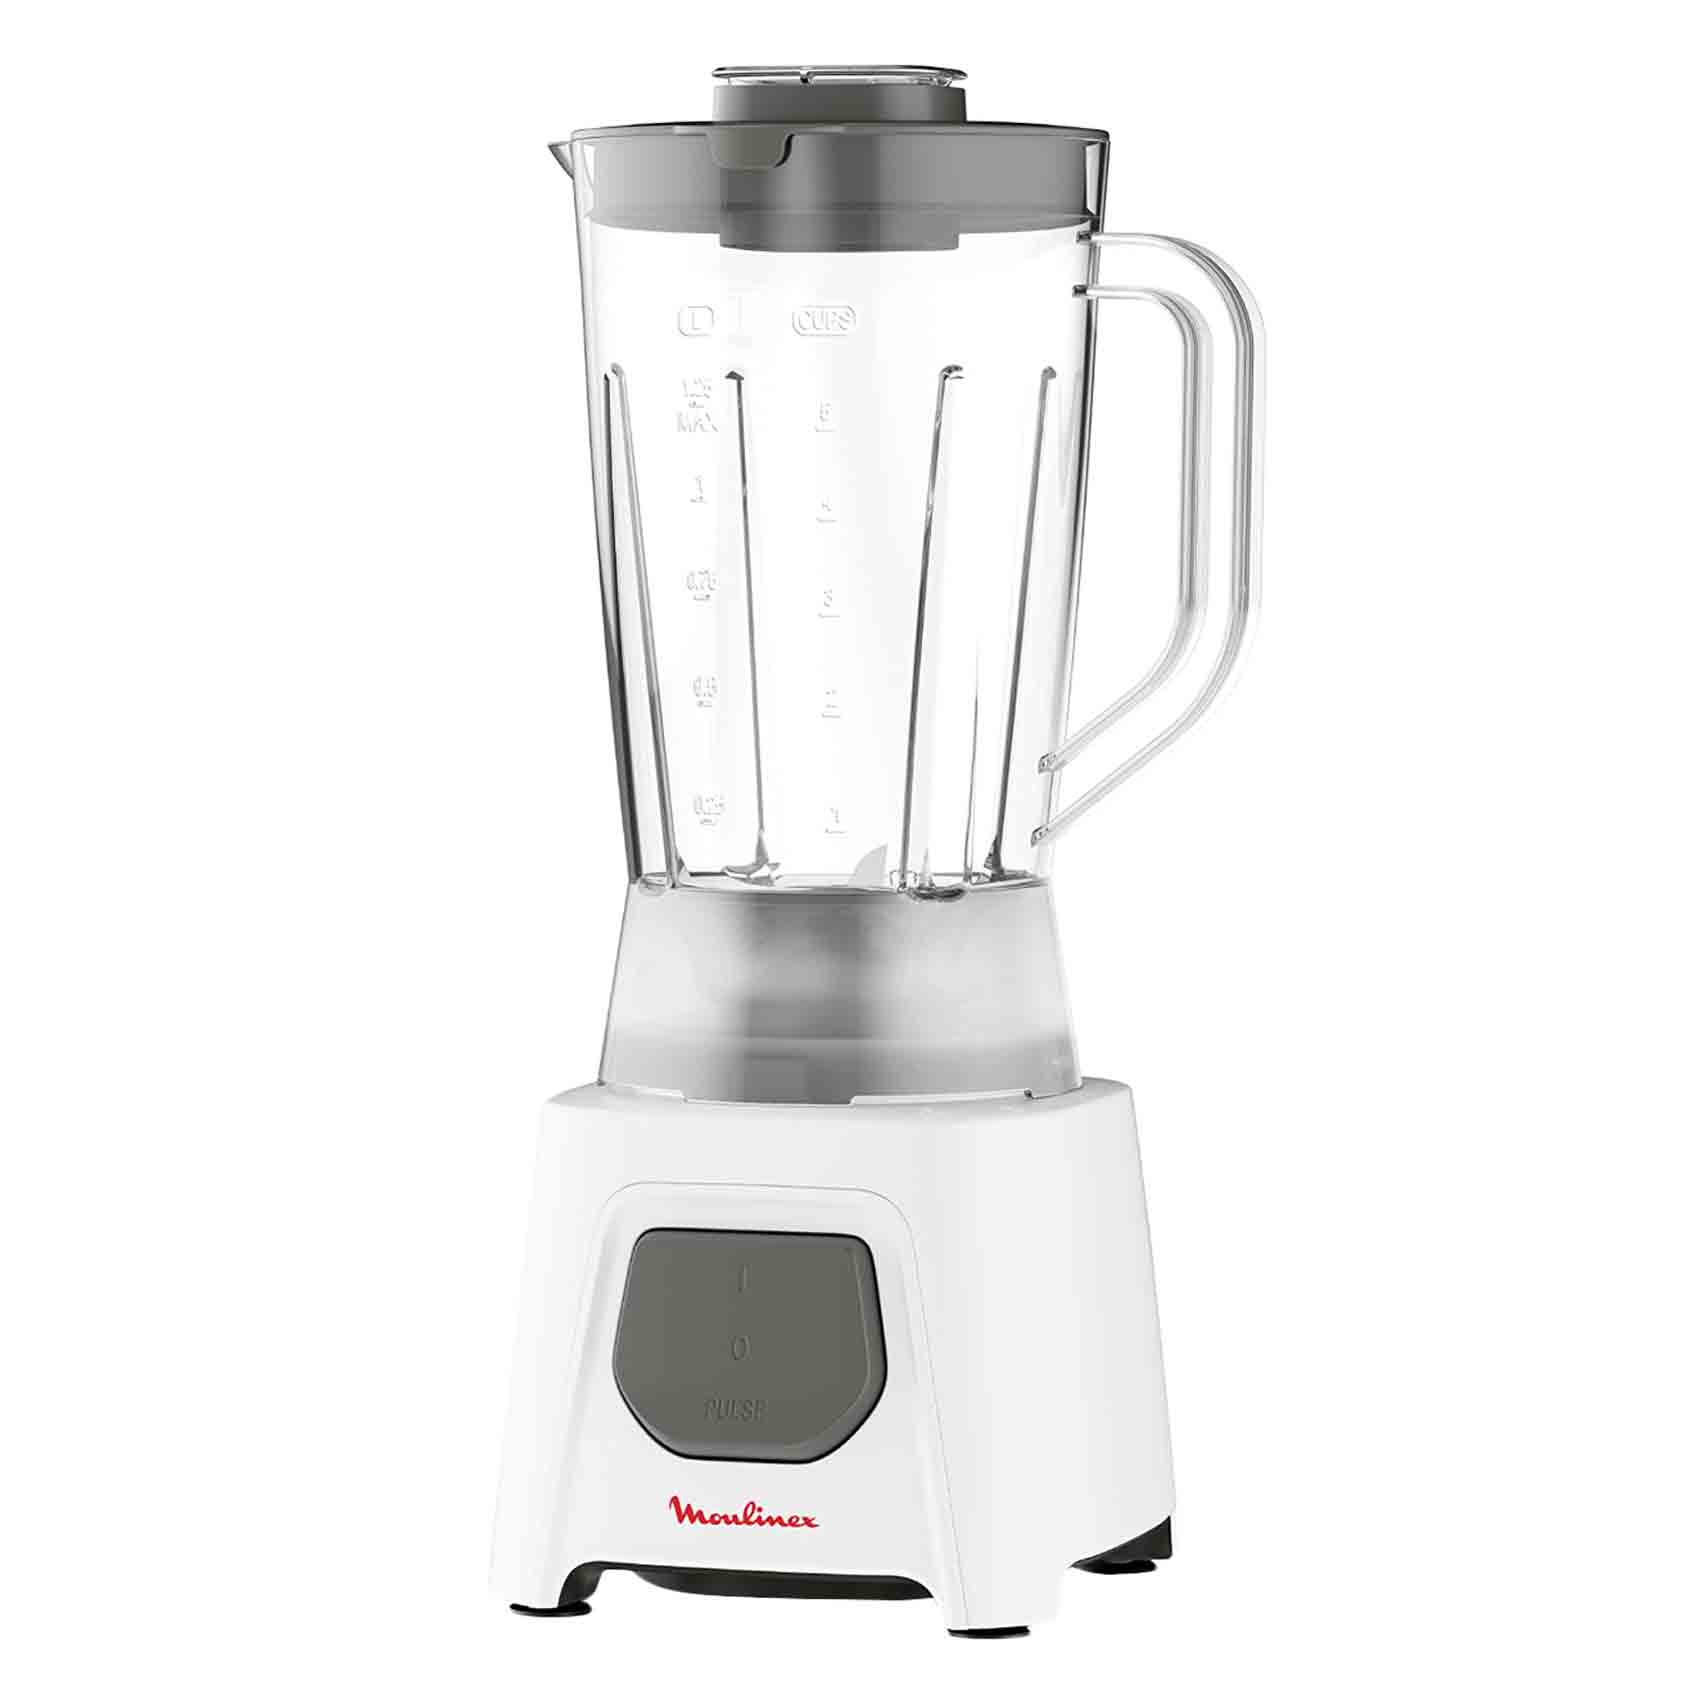 mere Herbs Made a contract Moulinex Blender LM2B2127 450W price in Saudi Arabia | Compare Prices